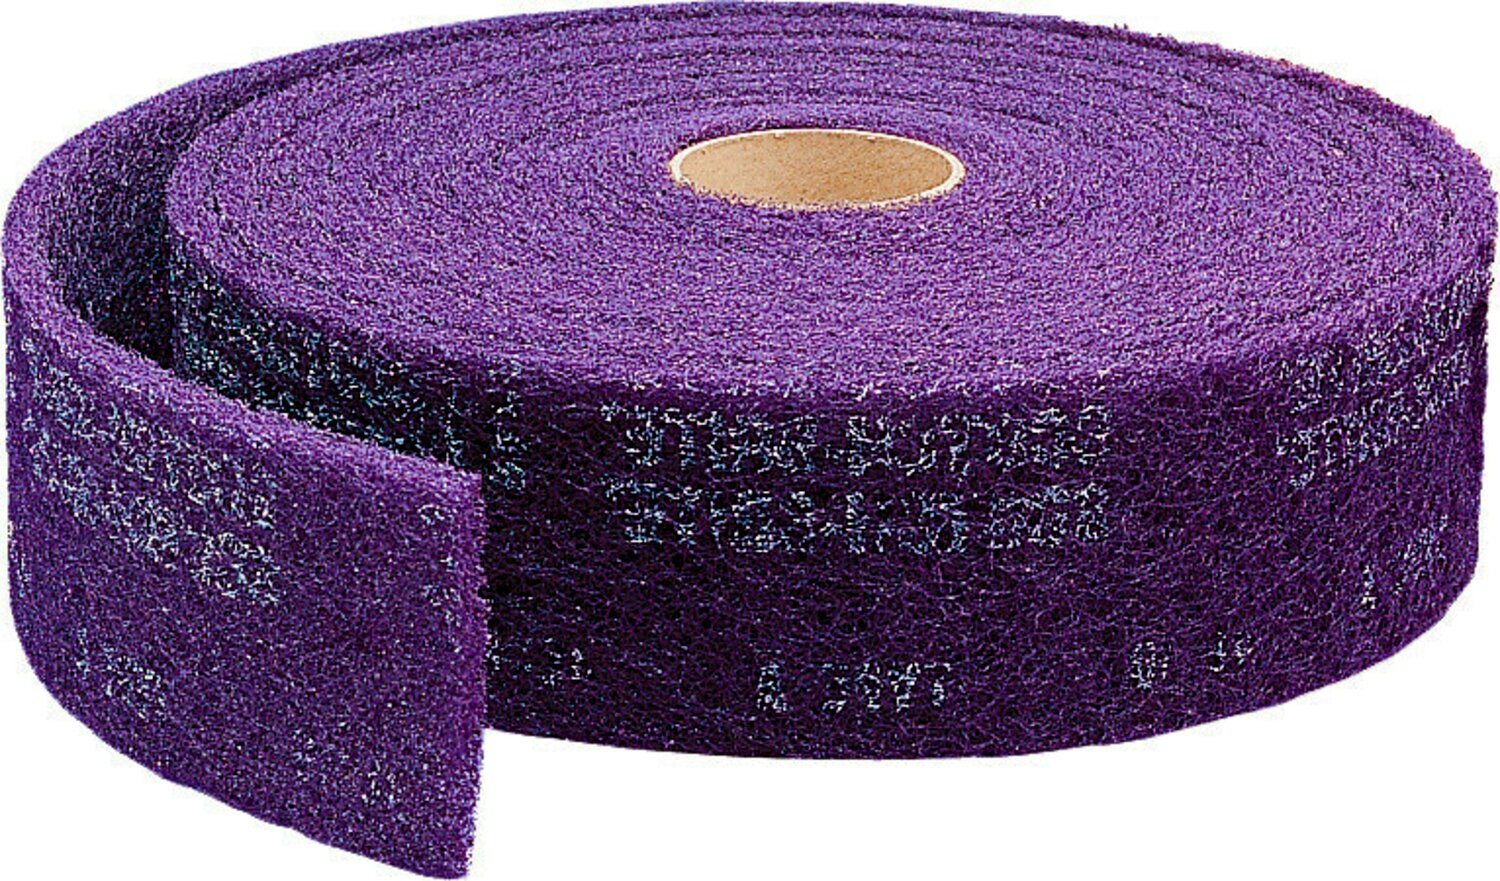 7100051824 - Scotch-Brite HS Blend and Finish Roll, BF-RL, A/O Very Fine, Config